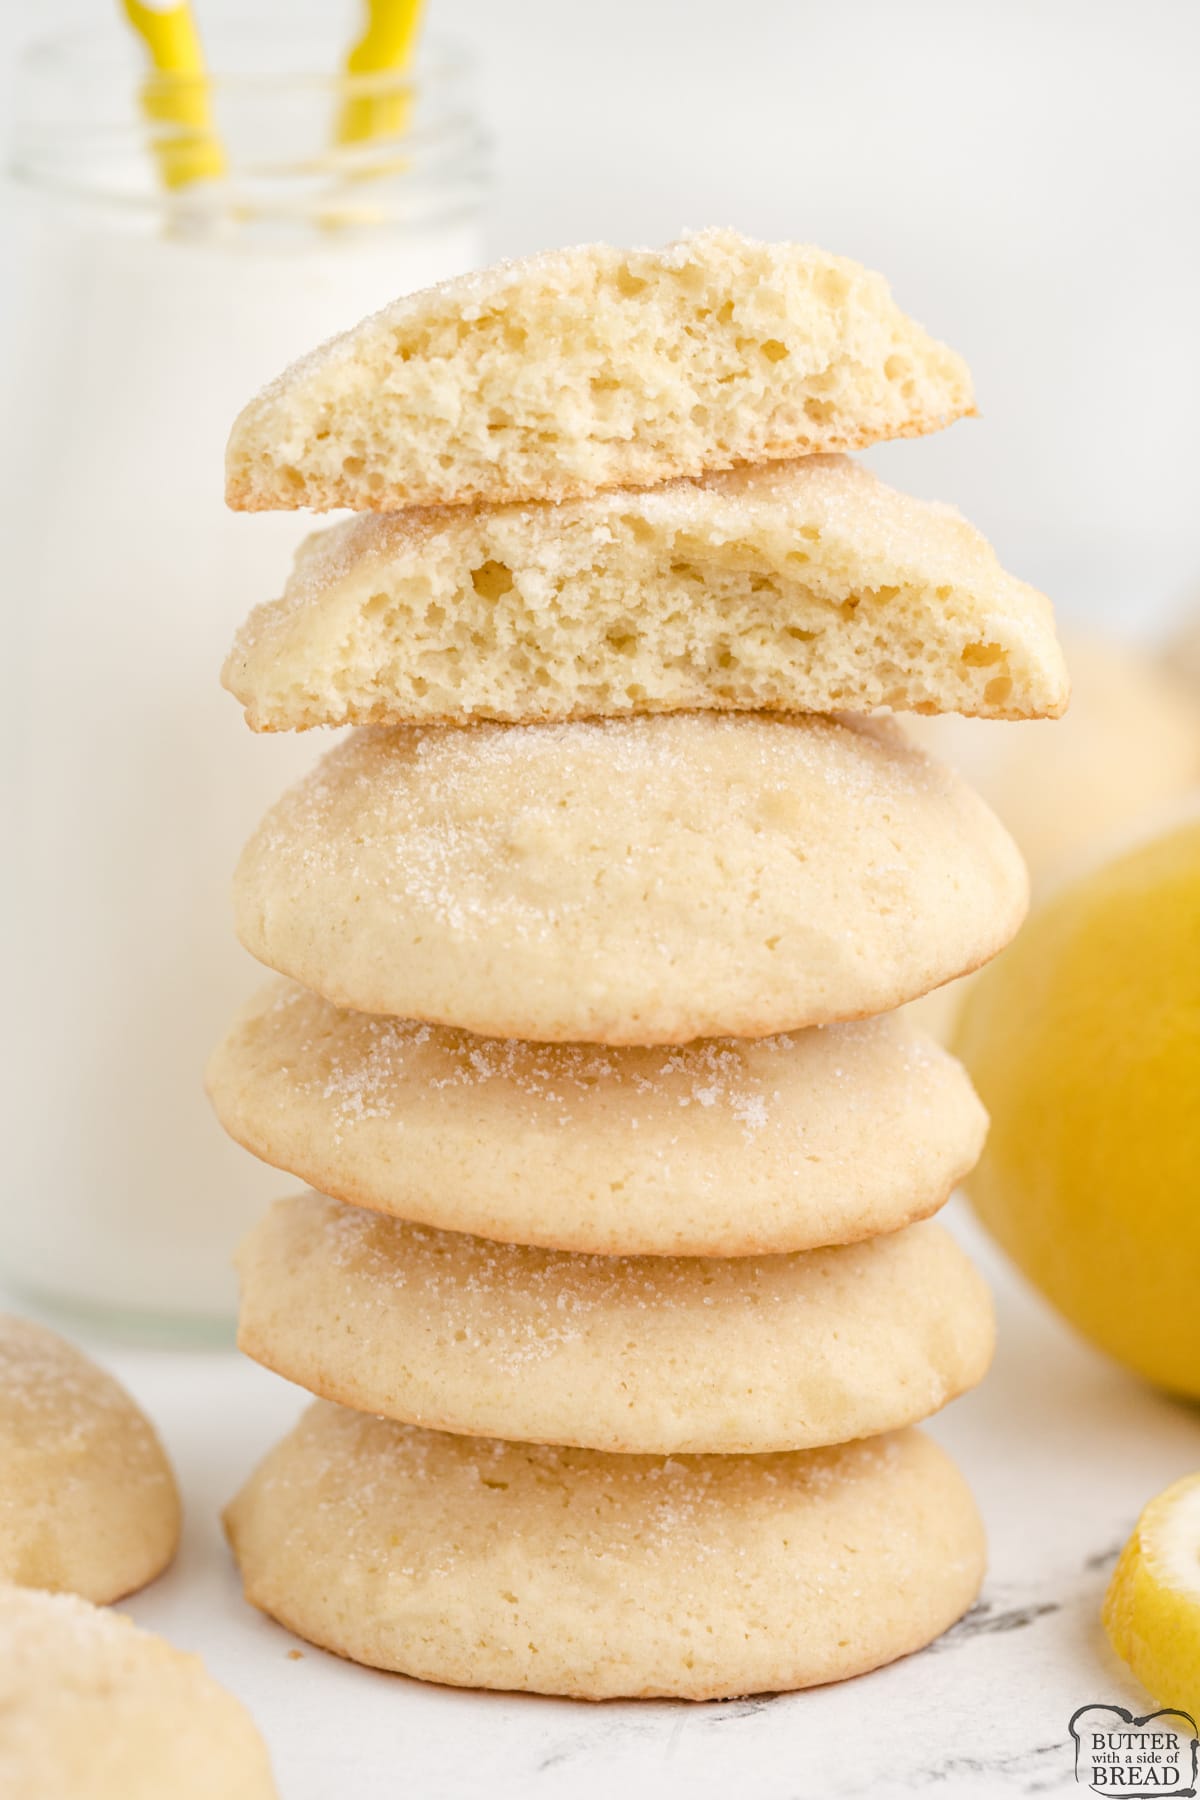 Lemonade Cookies are made with frozen lemonade concentrate. Only 6 ingredients needed to make these simple lemon cookies!